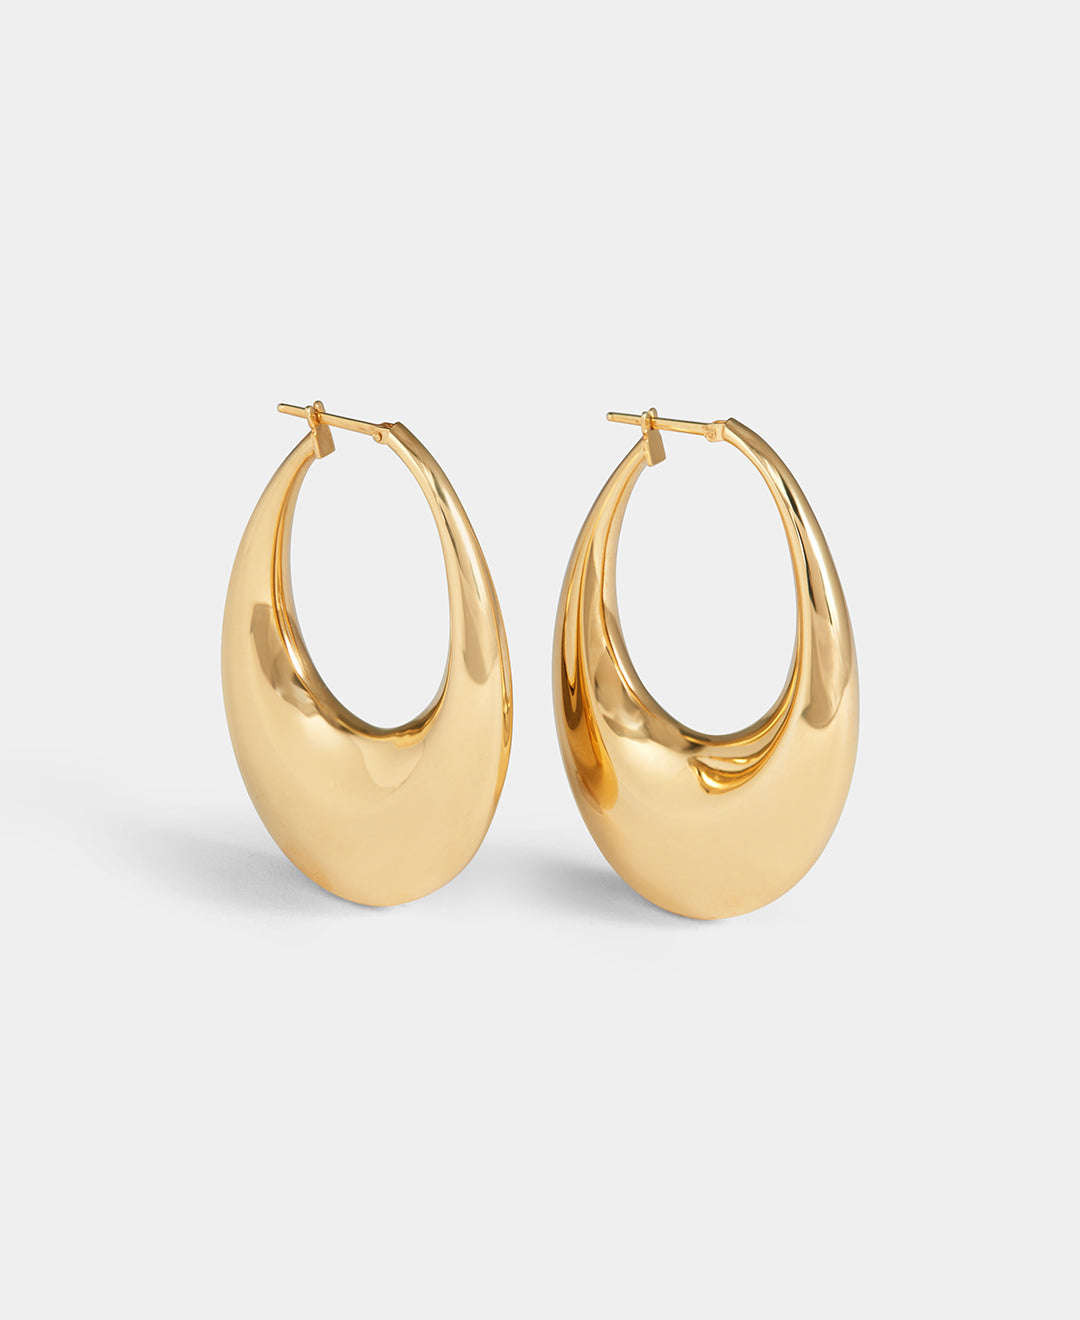 A pair of Carine earrings in yellow gold are displayed on a white background.